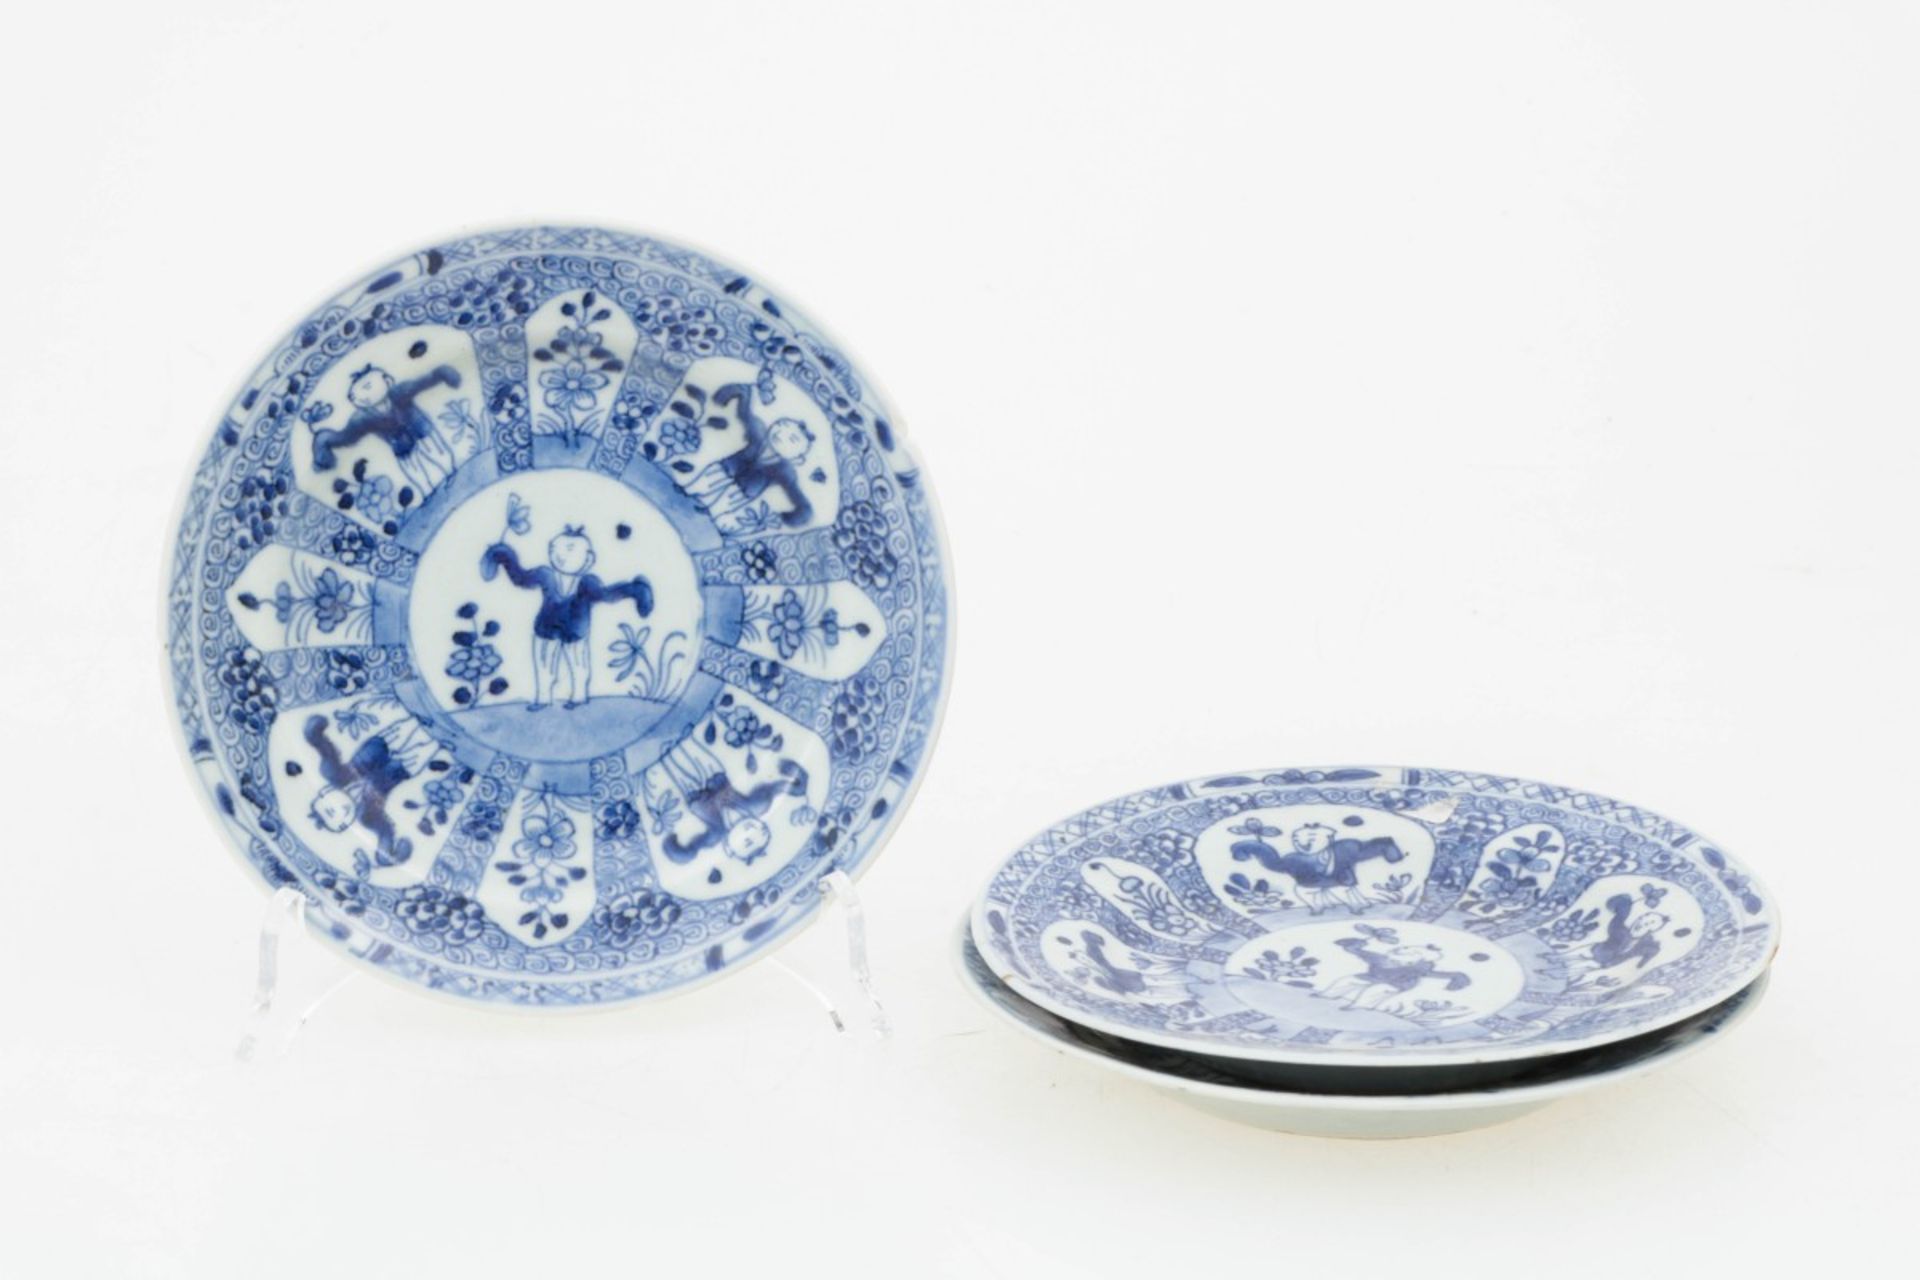 A set of (3) porcelain plates decorated with fools. China, 18th century.